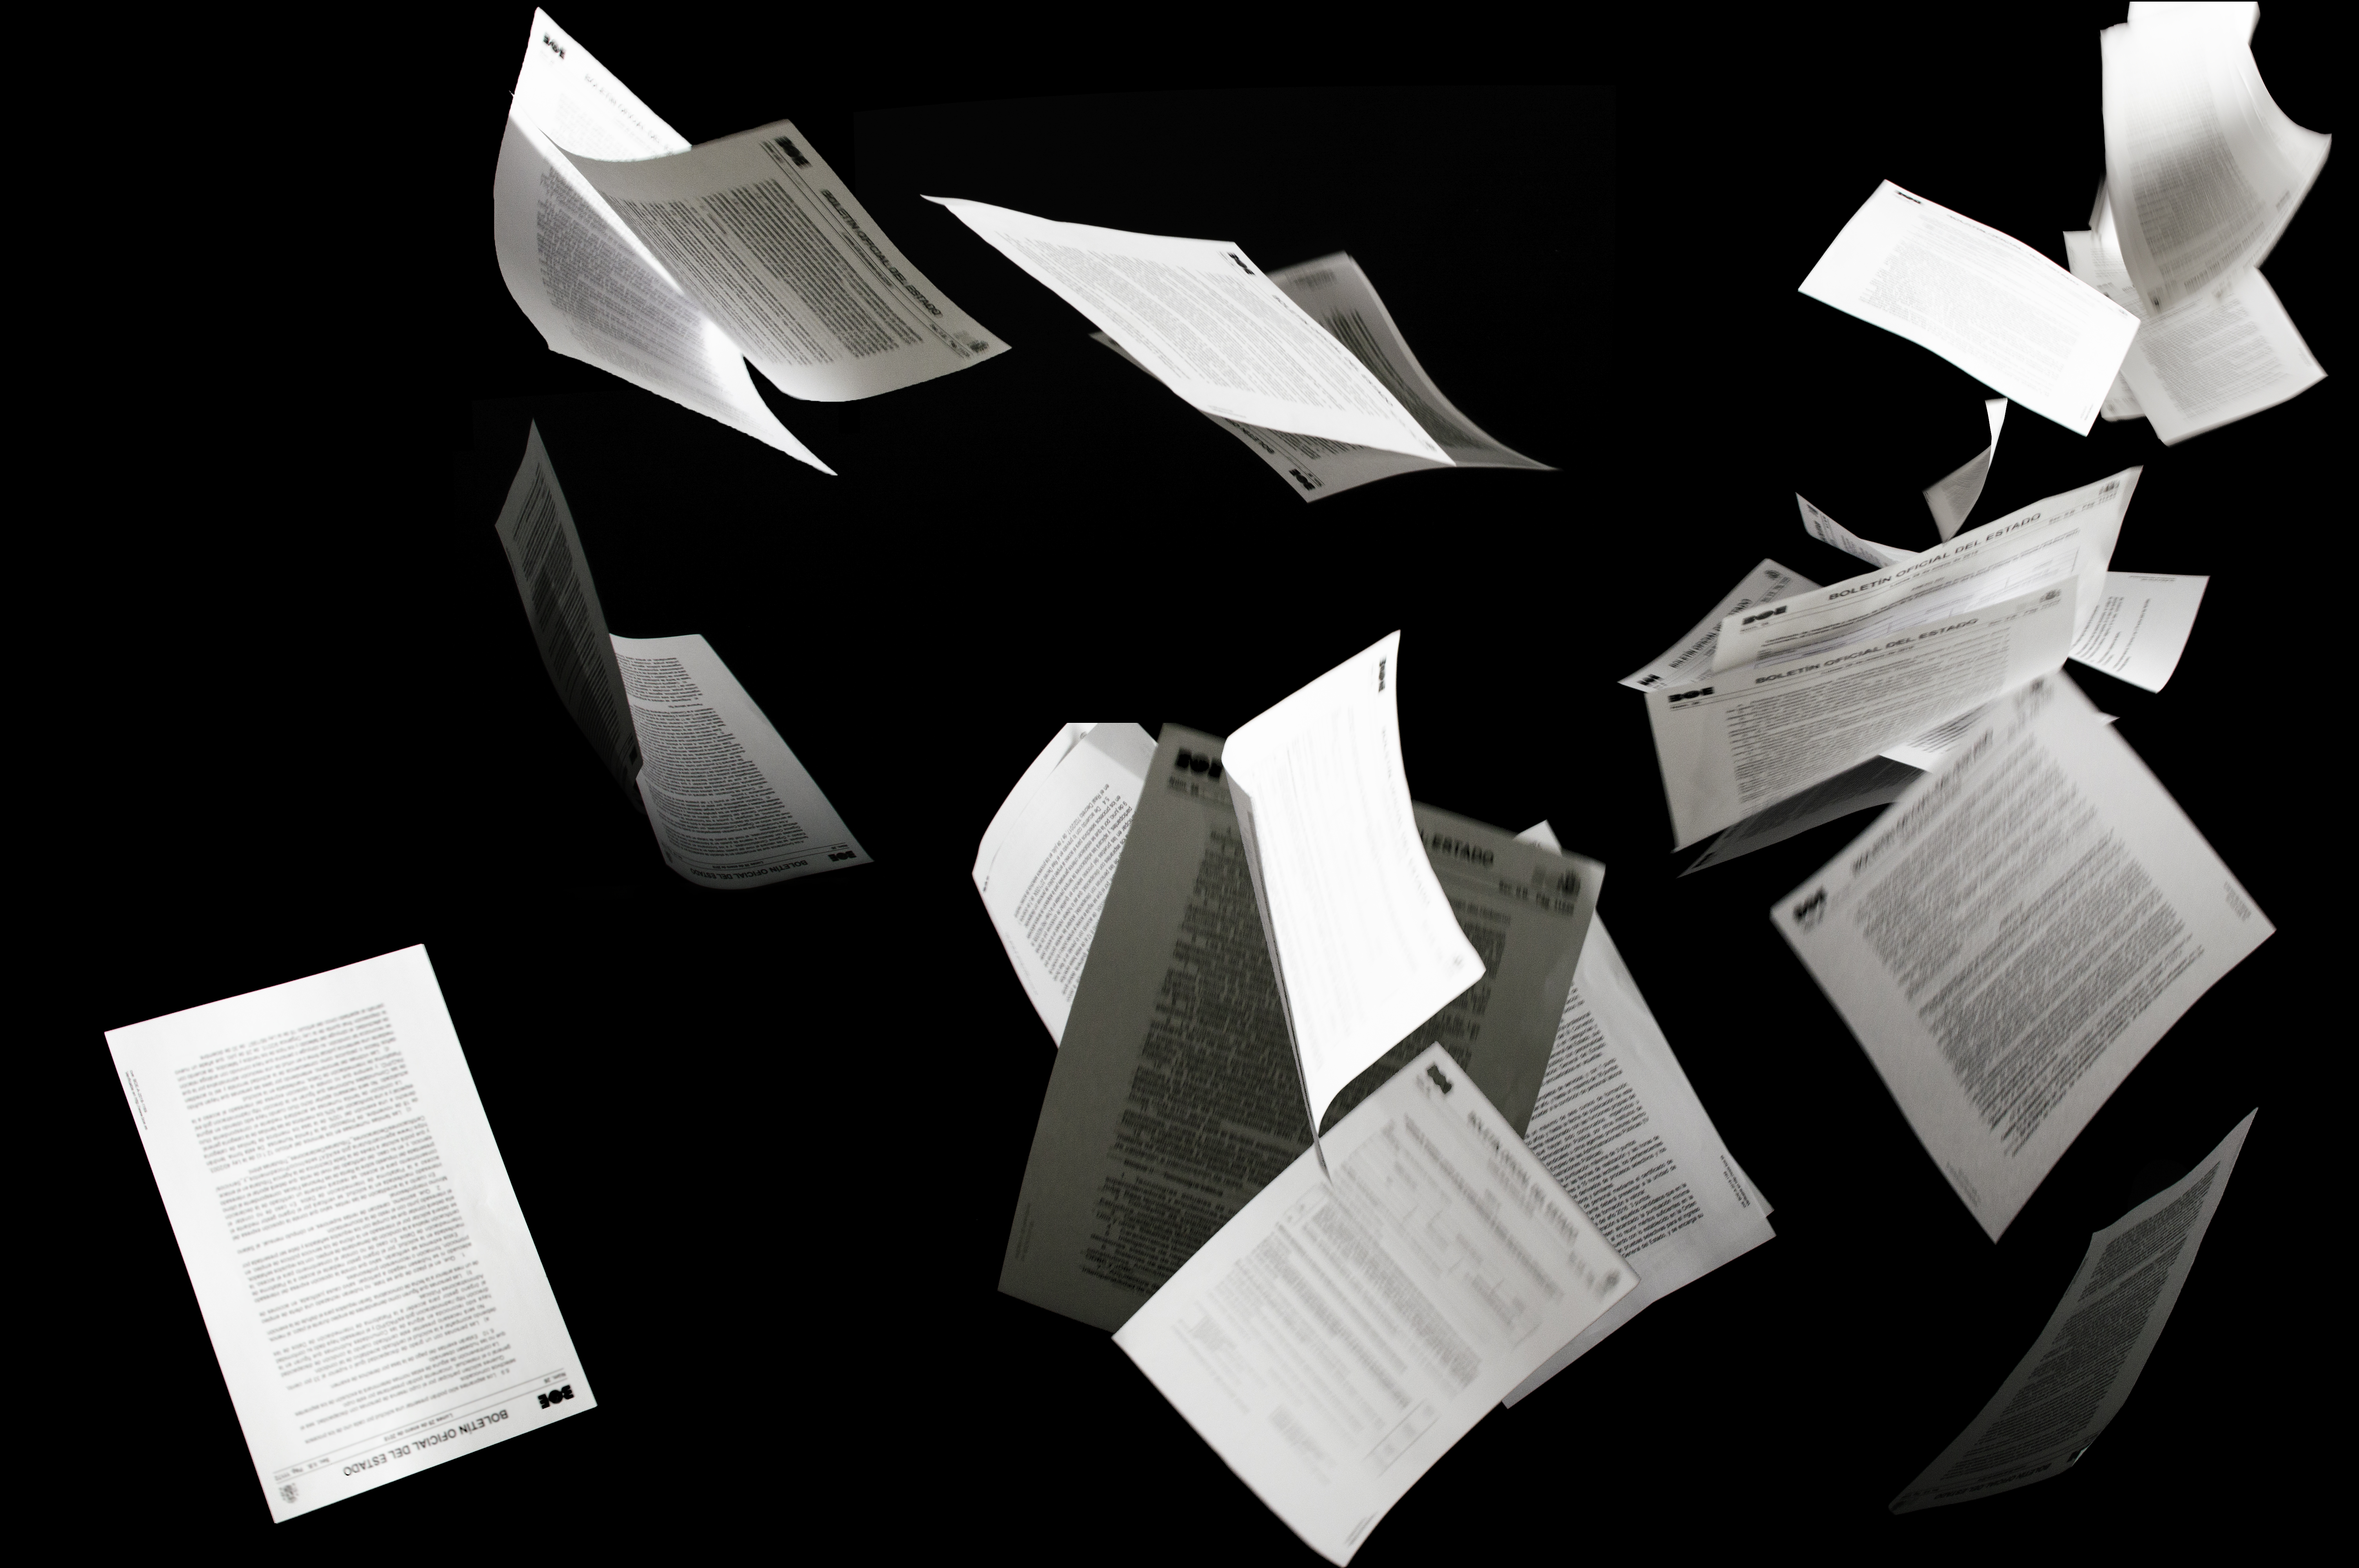 Papers flying on black background